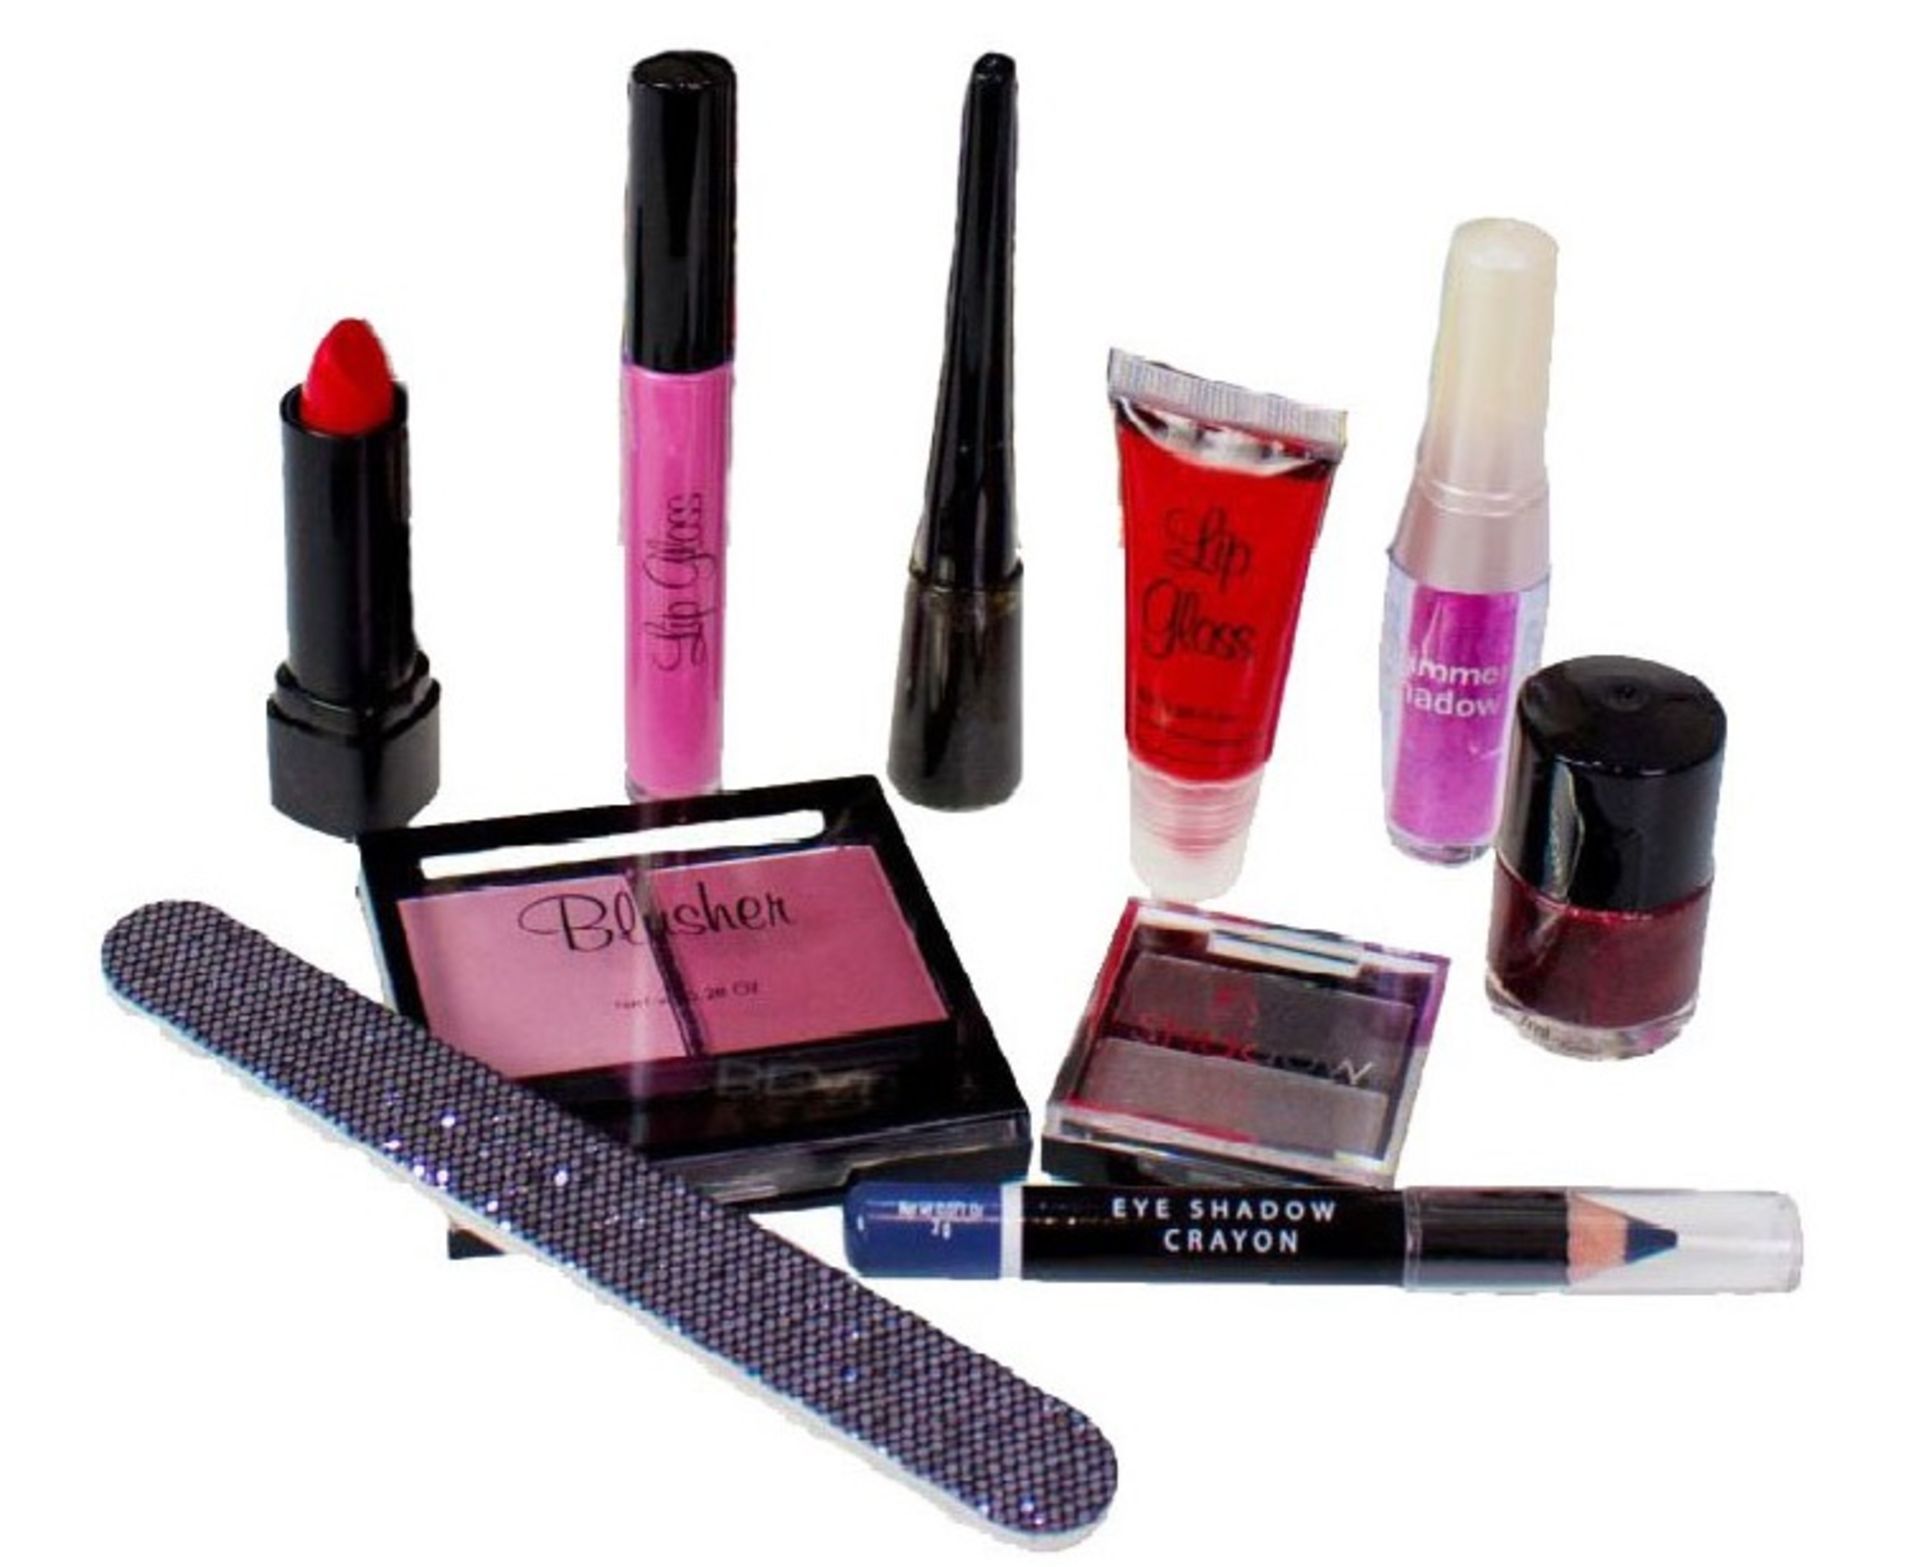 V *TRADE QTY* Brand New Ten Beauty Product Selection in Gift Bag (Contents vary) X 10 YOUR BID PRICE